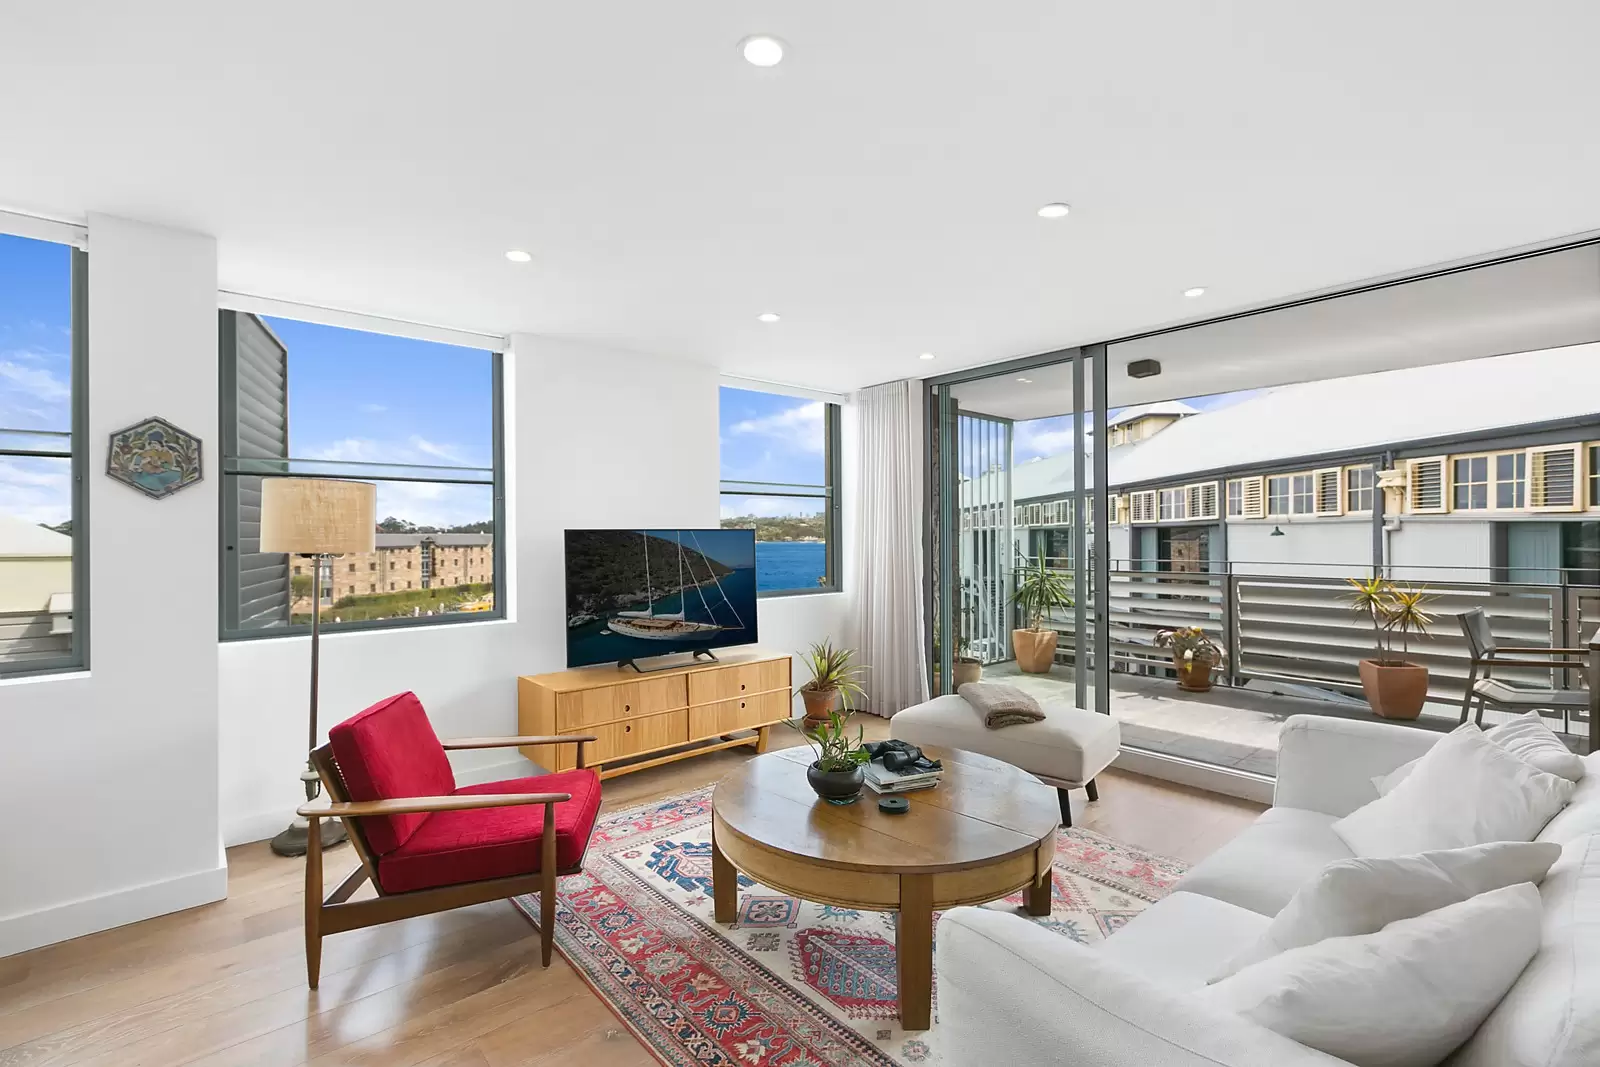 Photo #4: 401/21a Hickson Road, Walsh Bay - Sold by Sydney Sotheby's International Realty